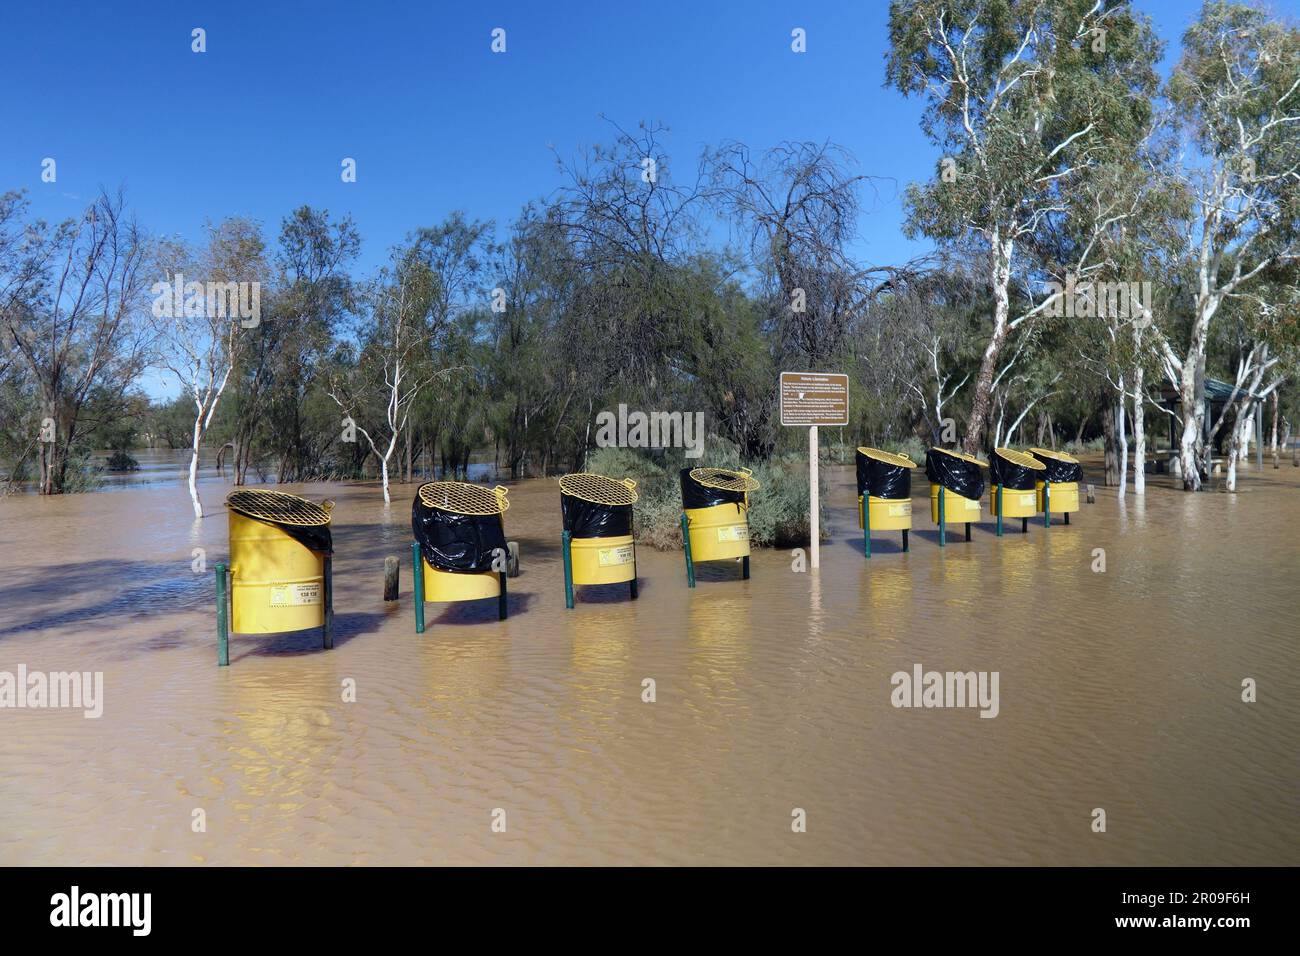 Floods caused by Tropical Cyclone Ilsa high up in the catchment inundate picnic area beside the Murchison River, Western Australia Stock Photo